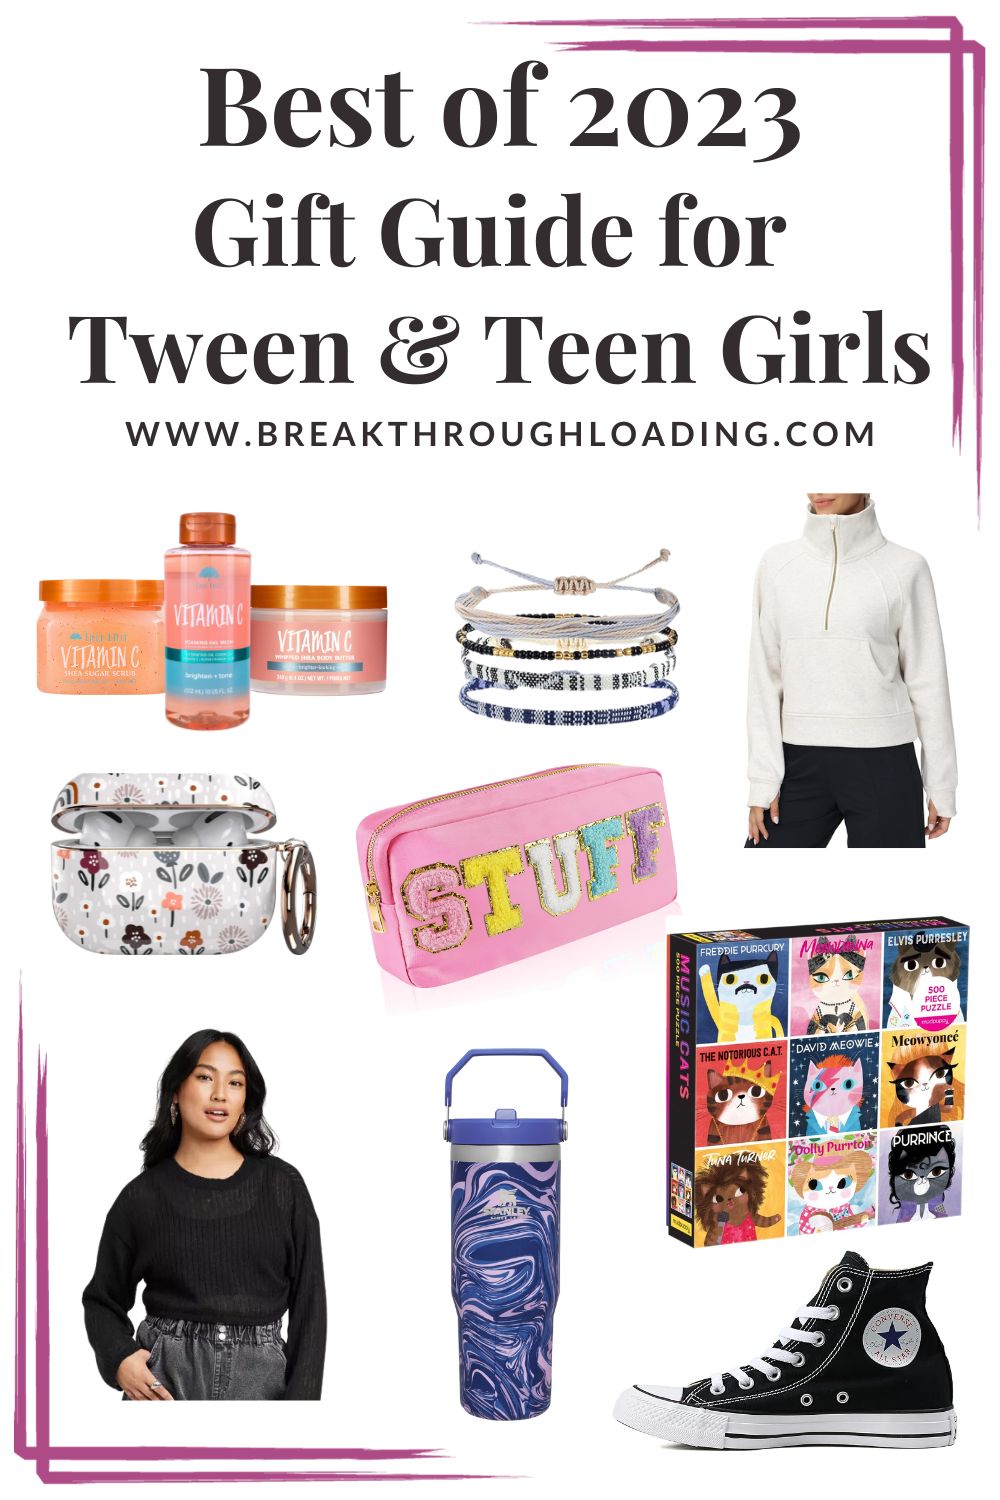 The Best Gifts For Tweens in 2023